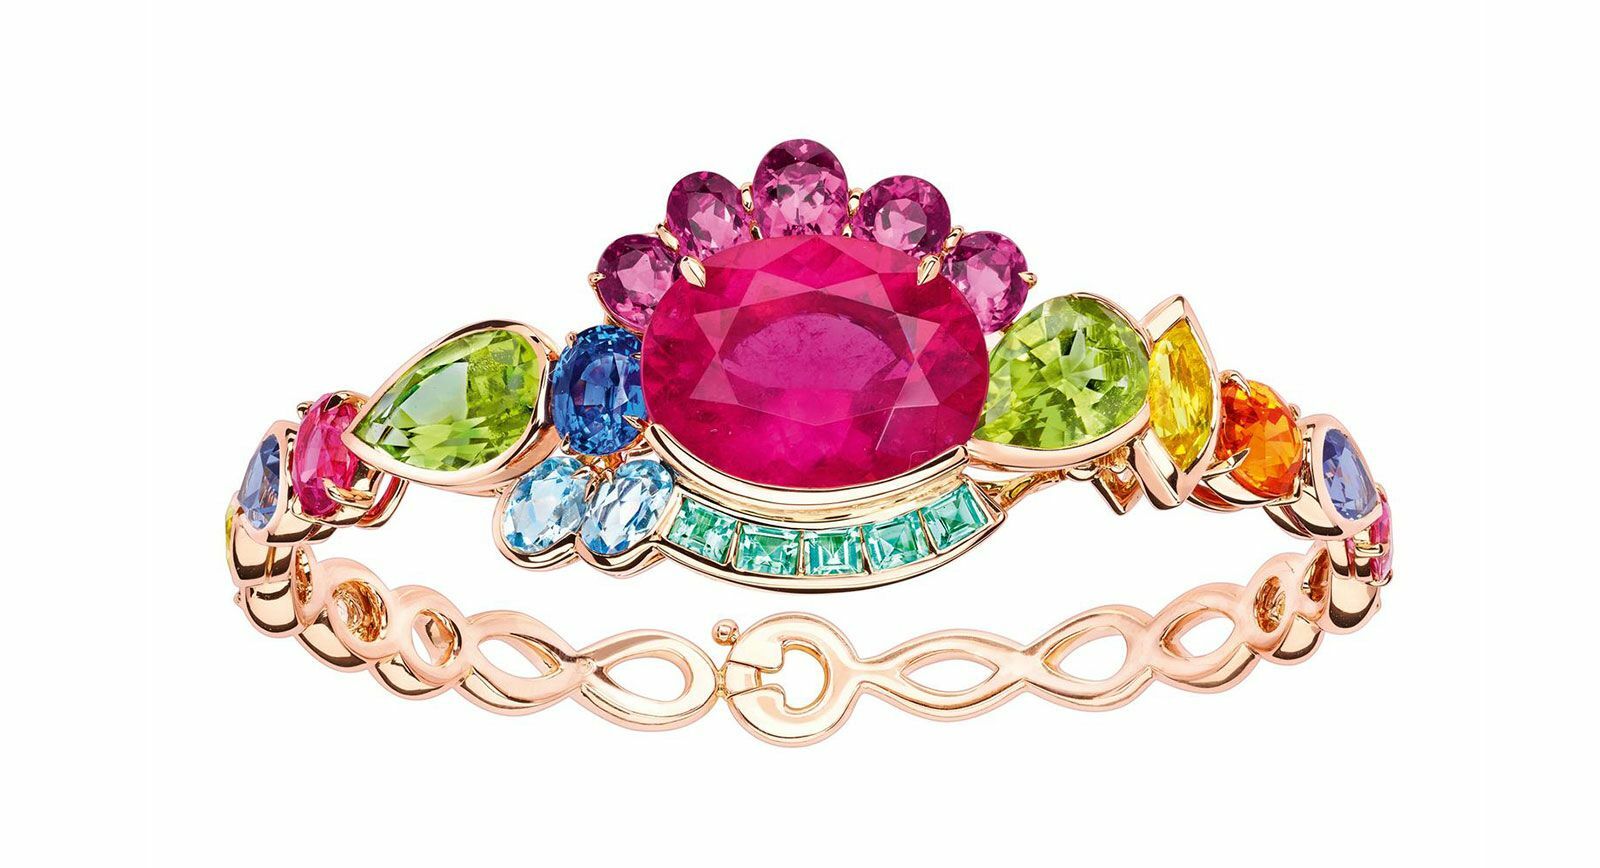 Granville – New Colourful Collection by Dior Joaillerie